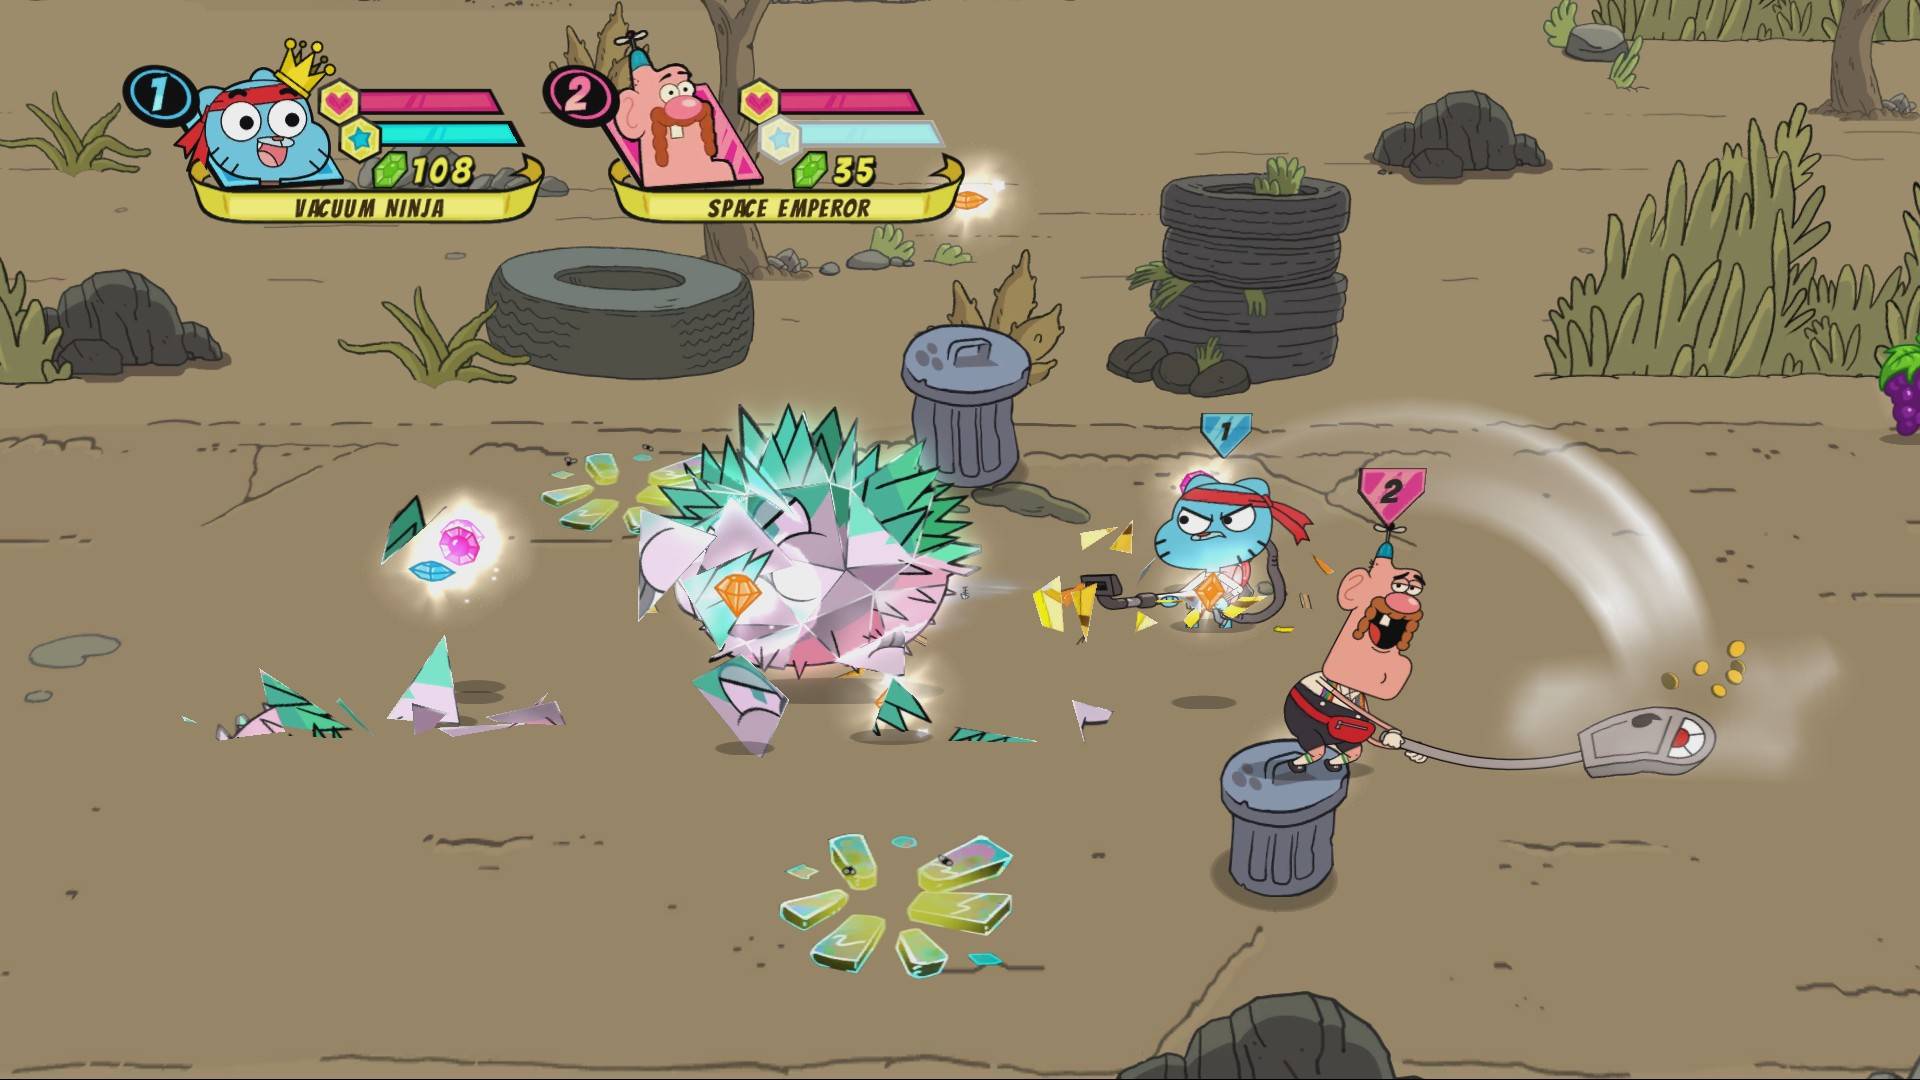 best cartoon network games: severl characters from cartoon network beat up goons